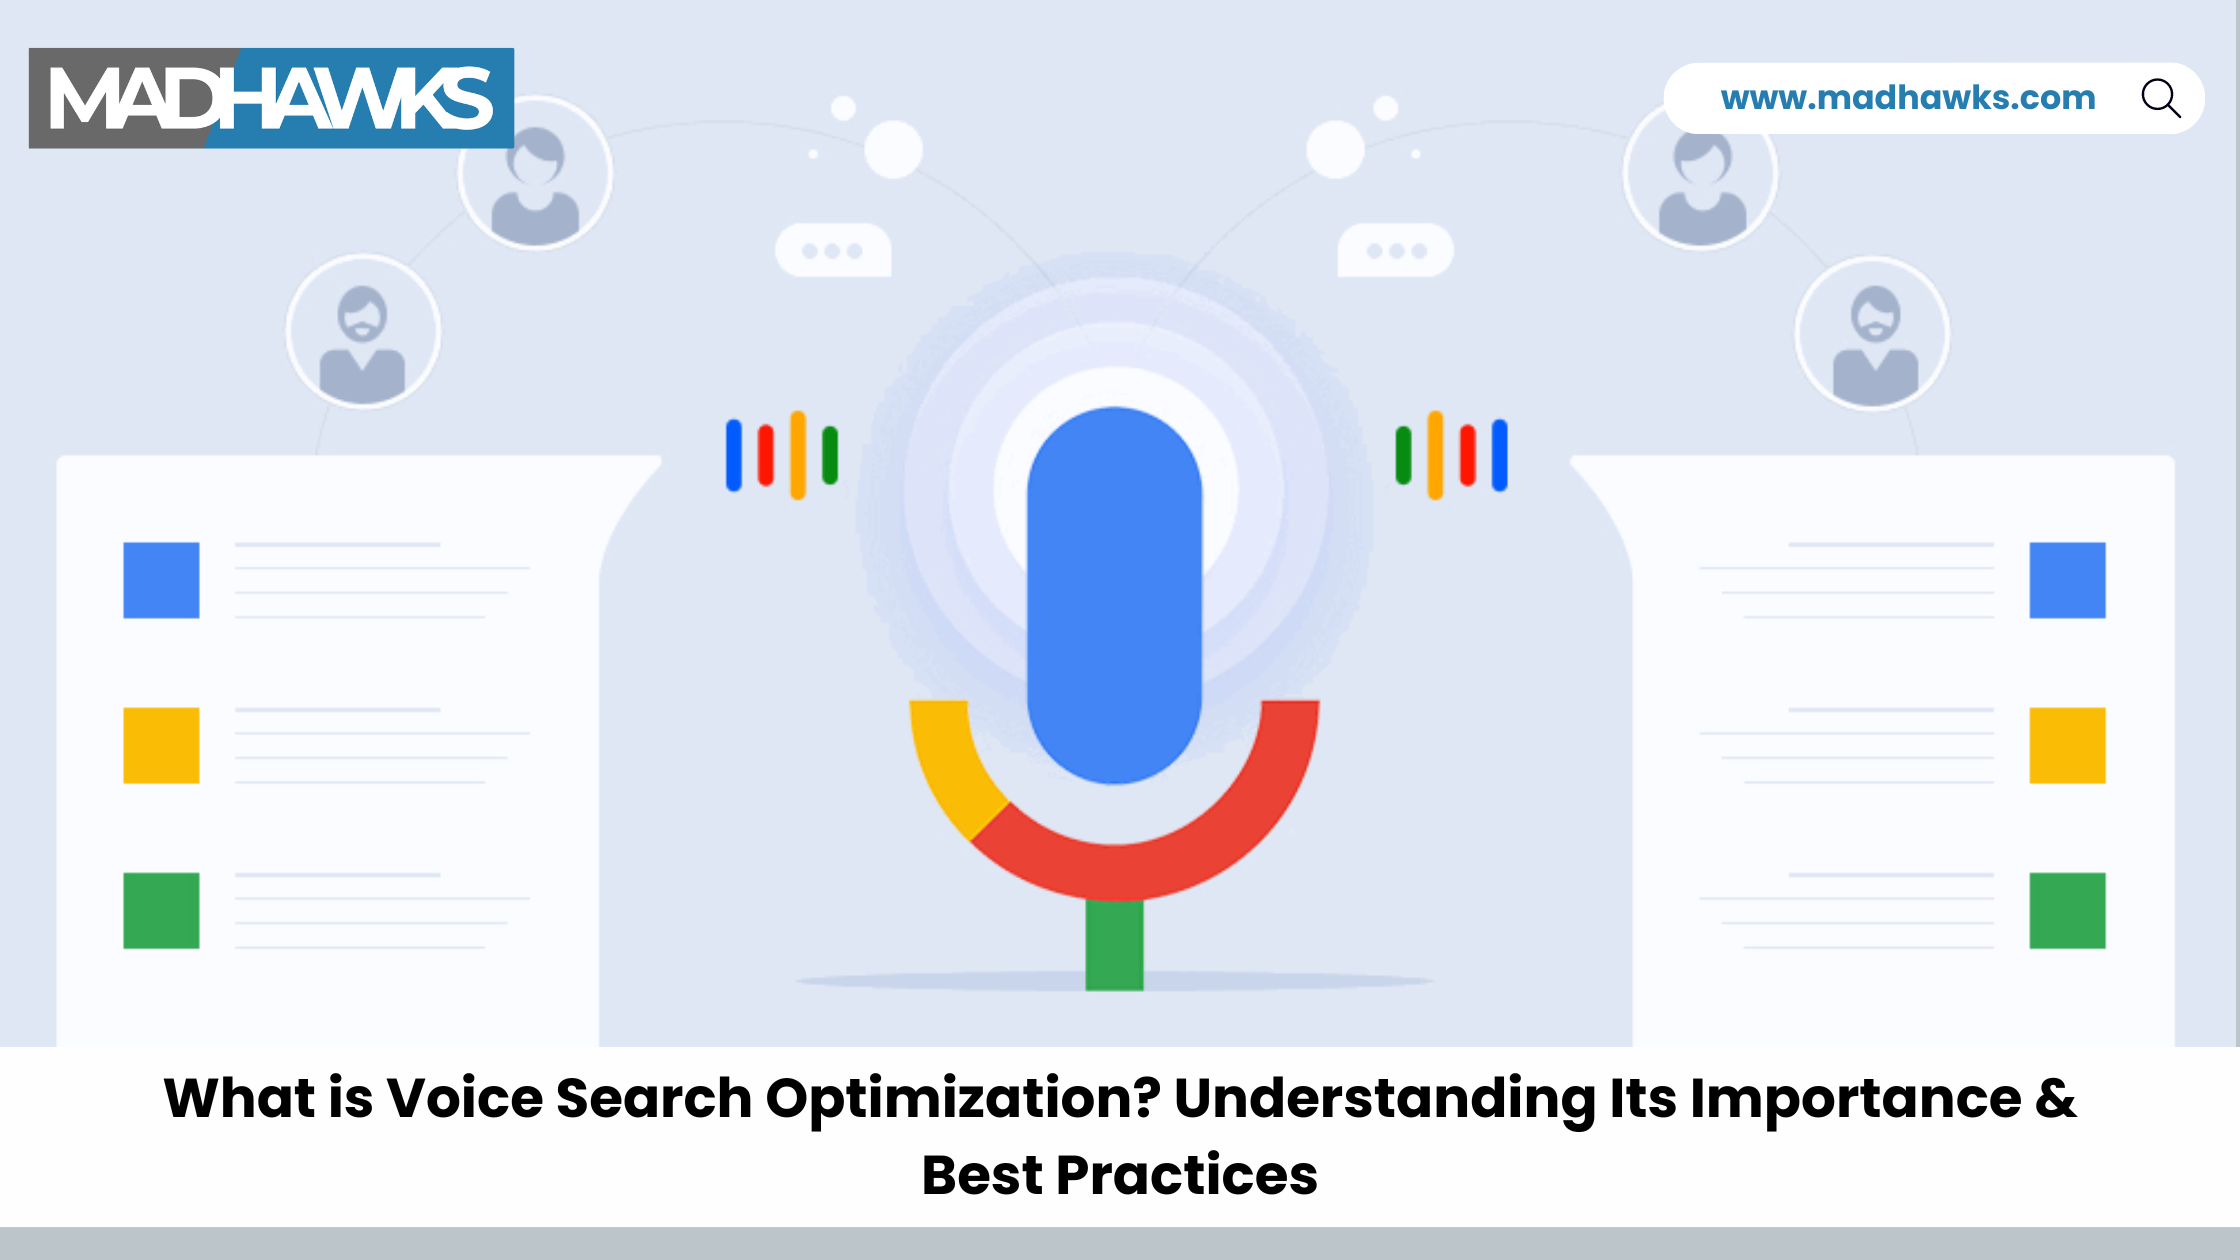 What is Voice Search Optimization? Understanding Its Importance & Best Practices